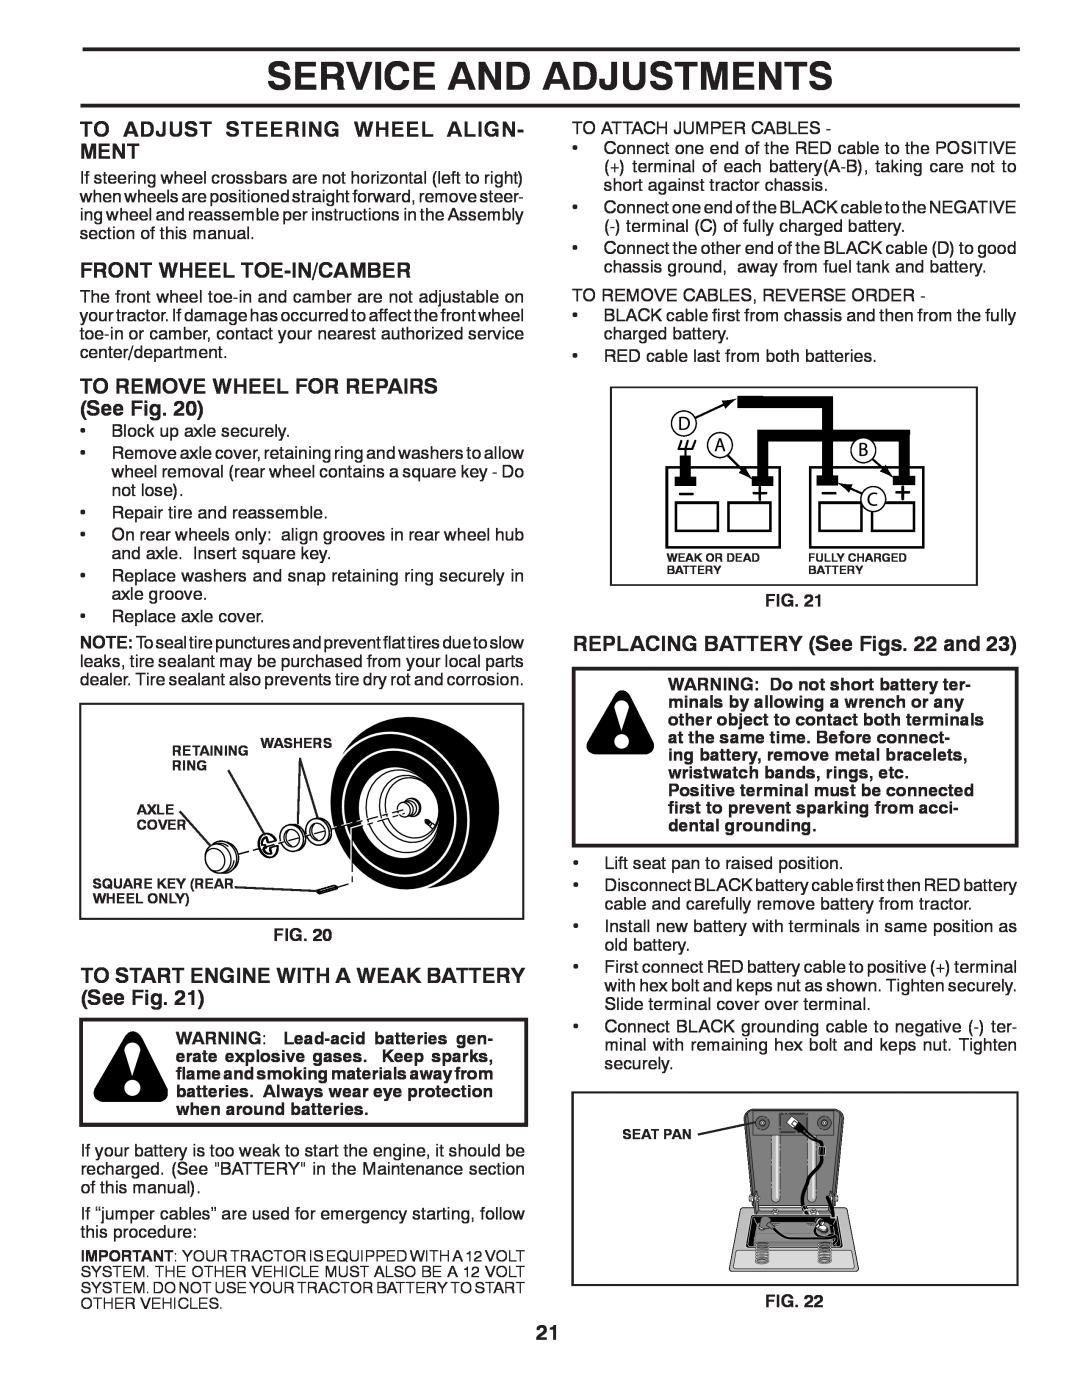 Poulan PP14538 manual To Adjust Steering Wheel Align- Ment, Front Wheel Toe-In/Camber, TO REMOVE WHEEL FOR REPAIRS See Fig 